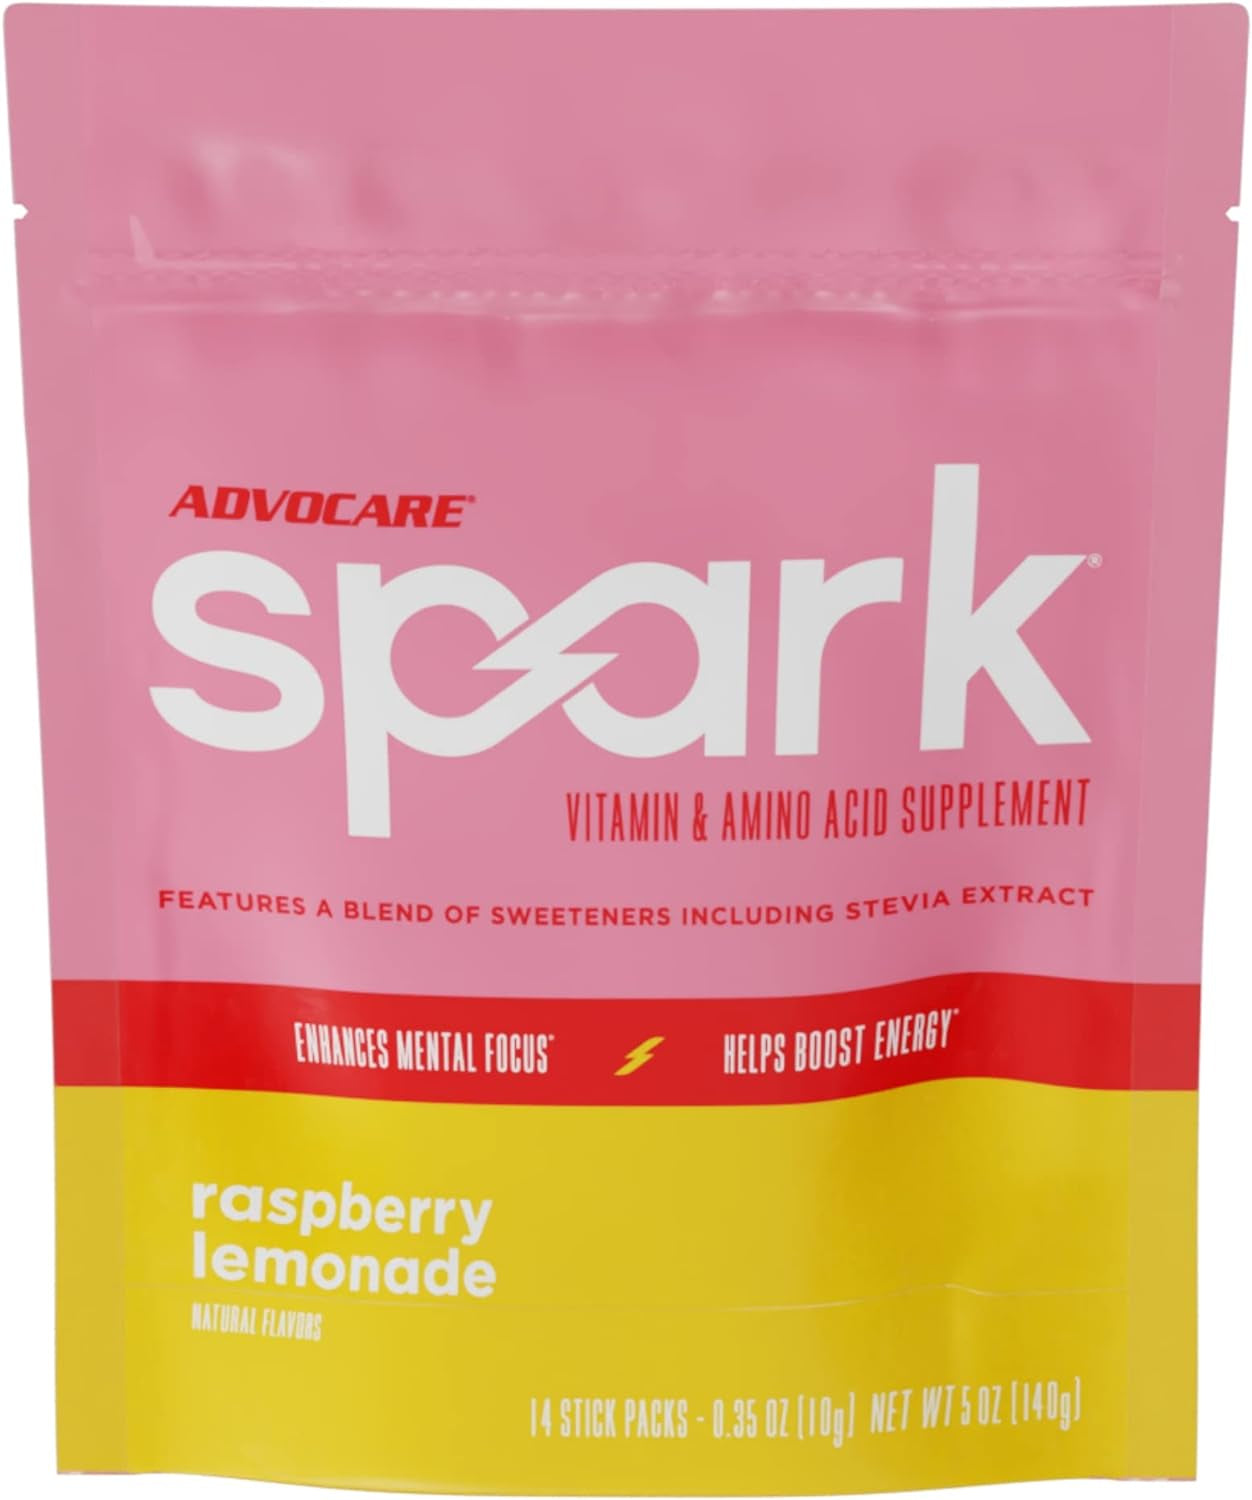 Advocare Spark Vitamin & Amino Acid Supplement - Focus and Energy Drink Mix with Stevia - Raspberry Lemonade - 14 Pack